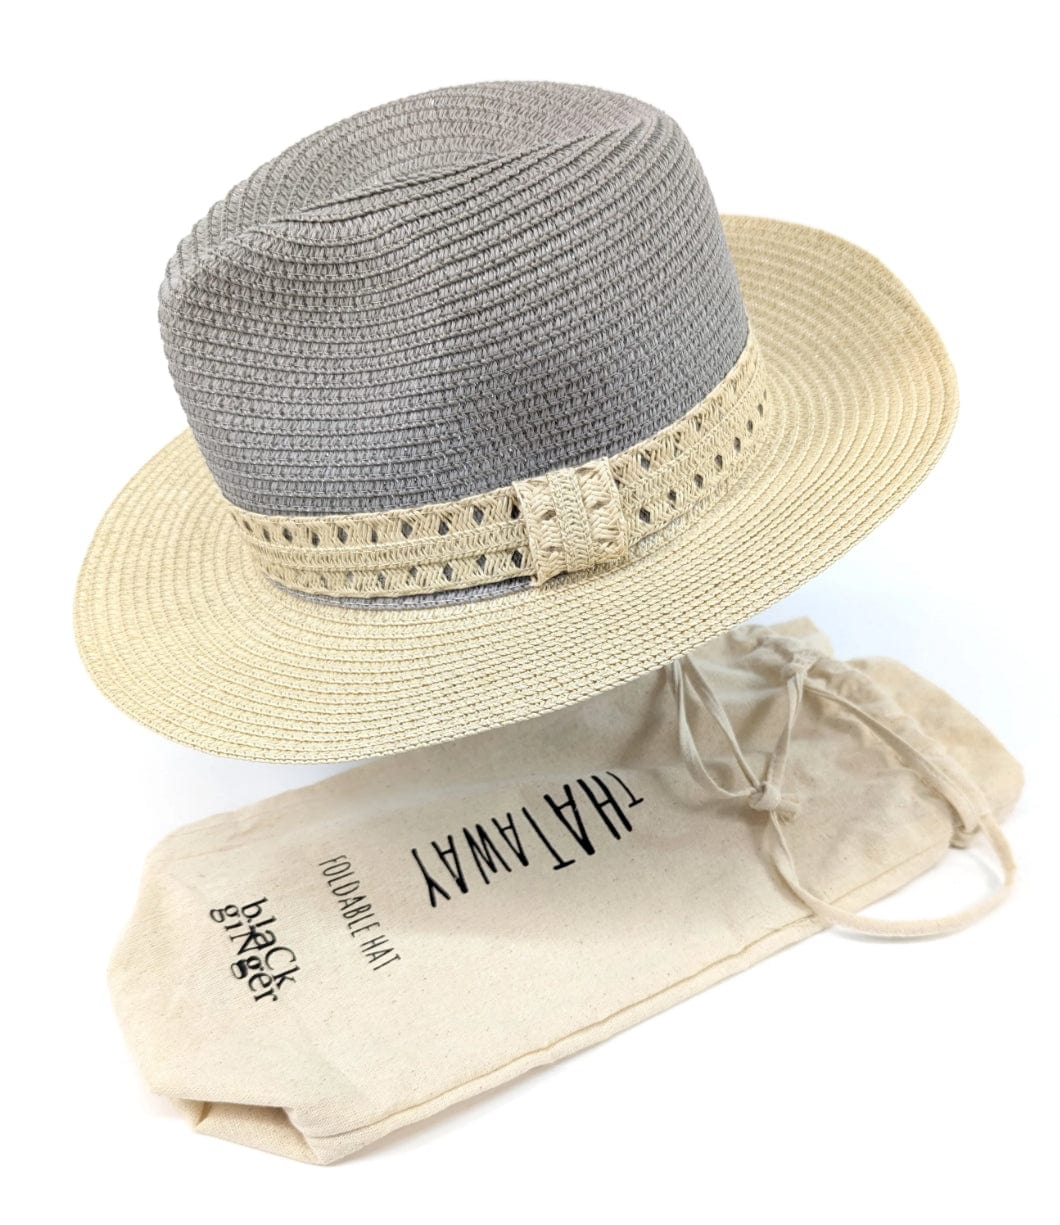 https://www.lusciousscarves.com/cdn/shop/files/lusciousscarves-vintage-style-packable-panama-hat-two-tone-grey-and-natural-foldable-travel-hat-34655691997374.jpg?v=1711971694